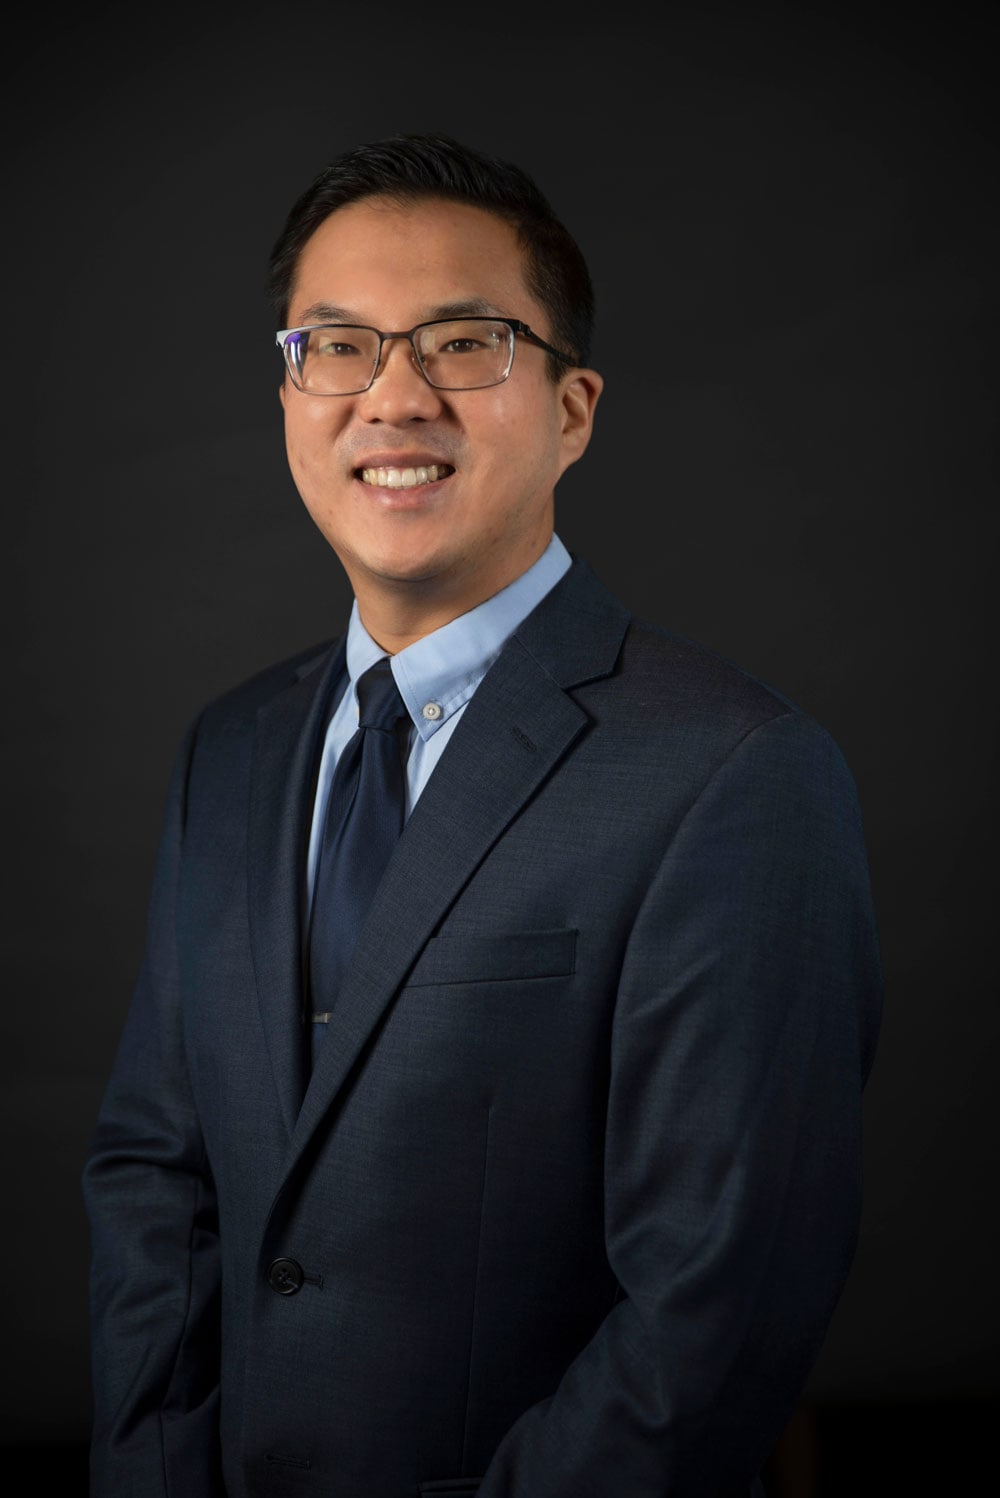 Dr. Andrew Kao was voted 'Best Ophthalmologist' in The Bakersfield Californian 2021 Best Of Reader's Choice Poll.